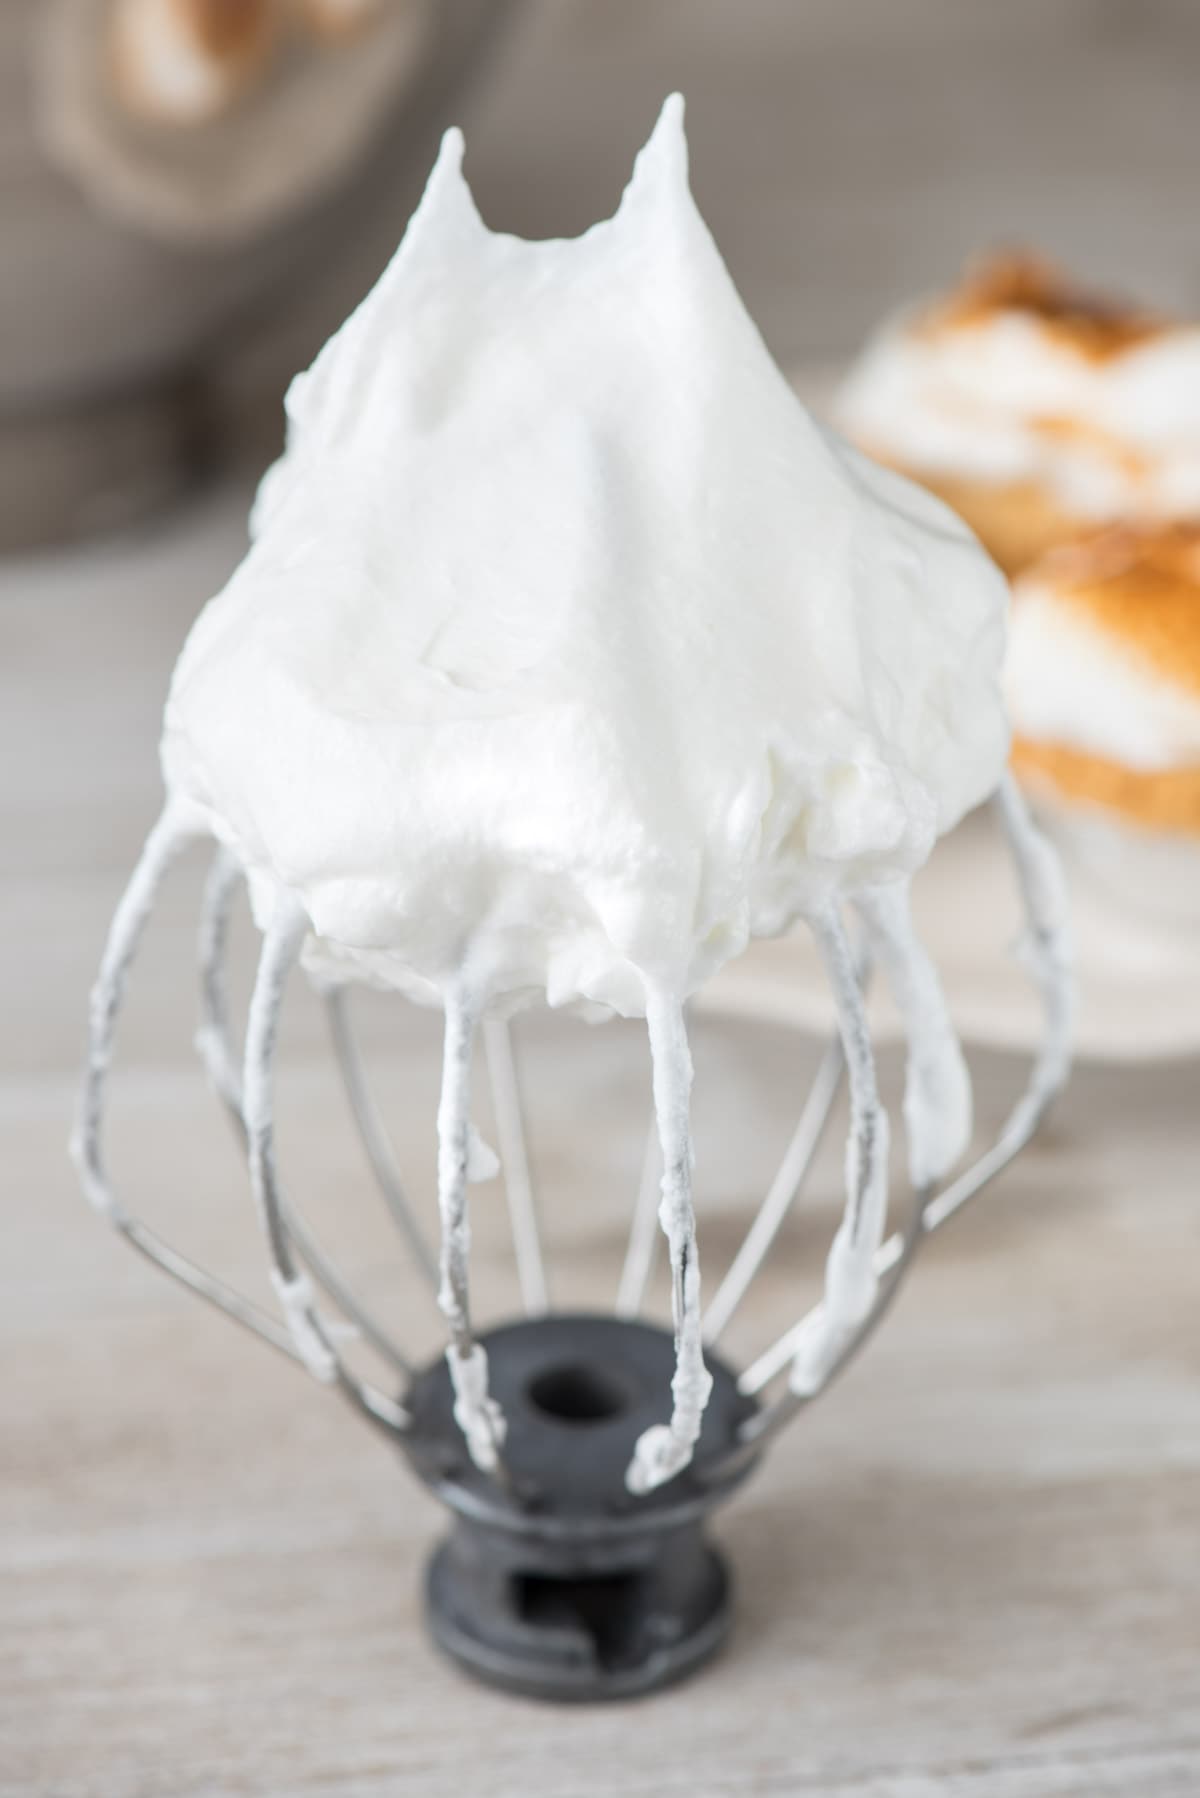 Easy Marshmallow Meringue Frosting - this meringue is so much better than a traditional baked one! It takes like a melted marshmallow!